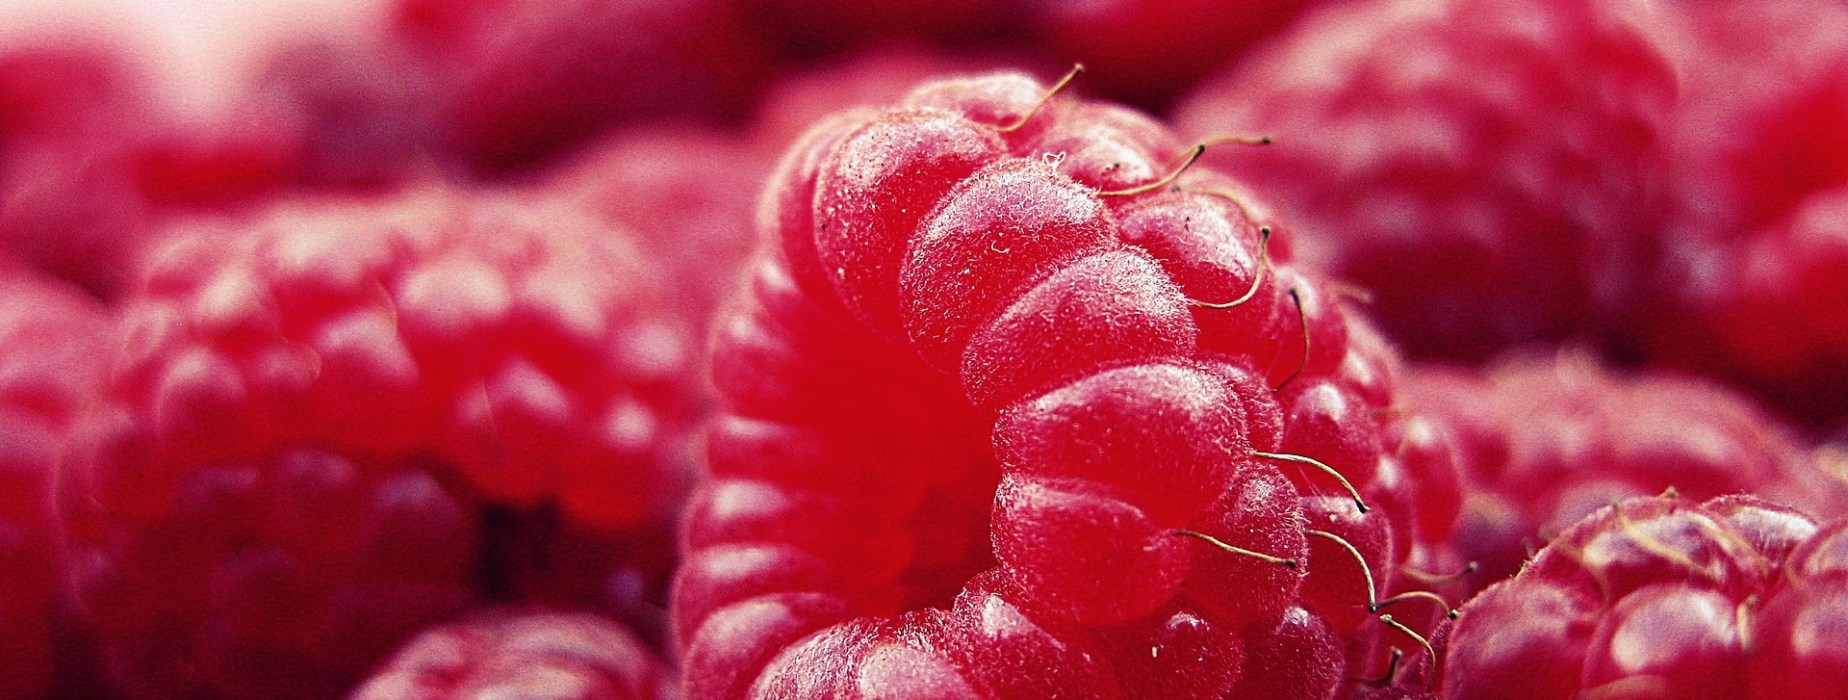 A close-up picture of some raspberries